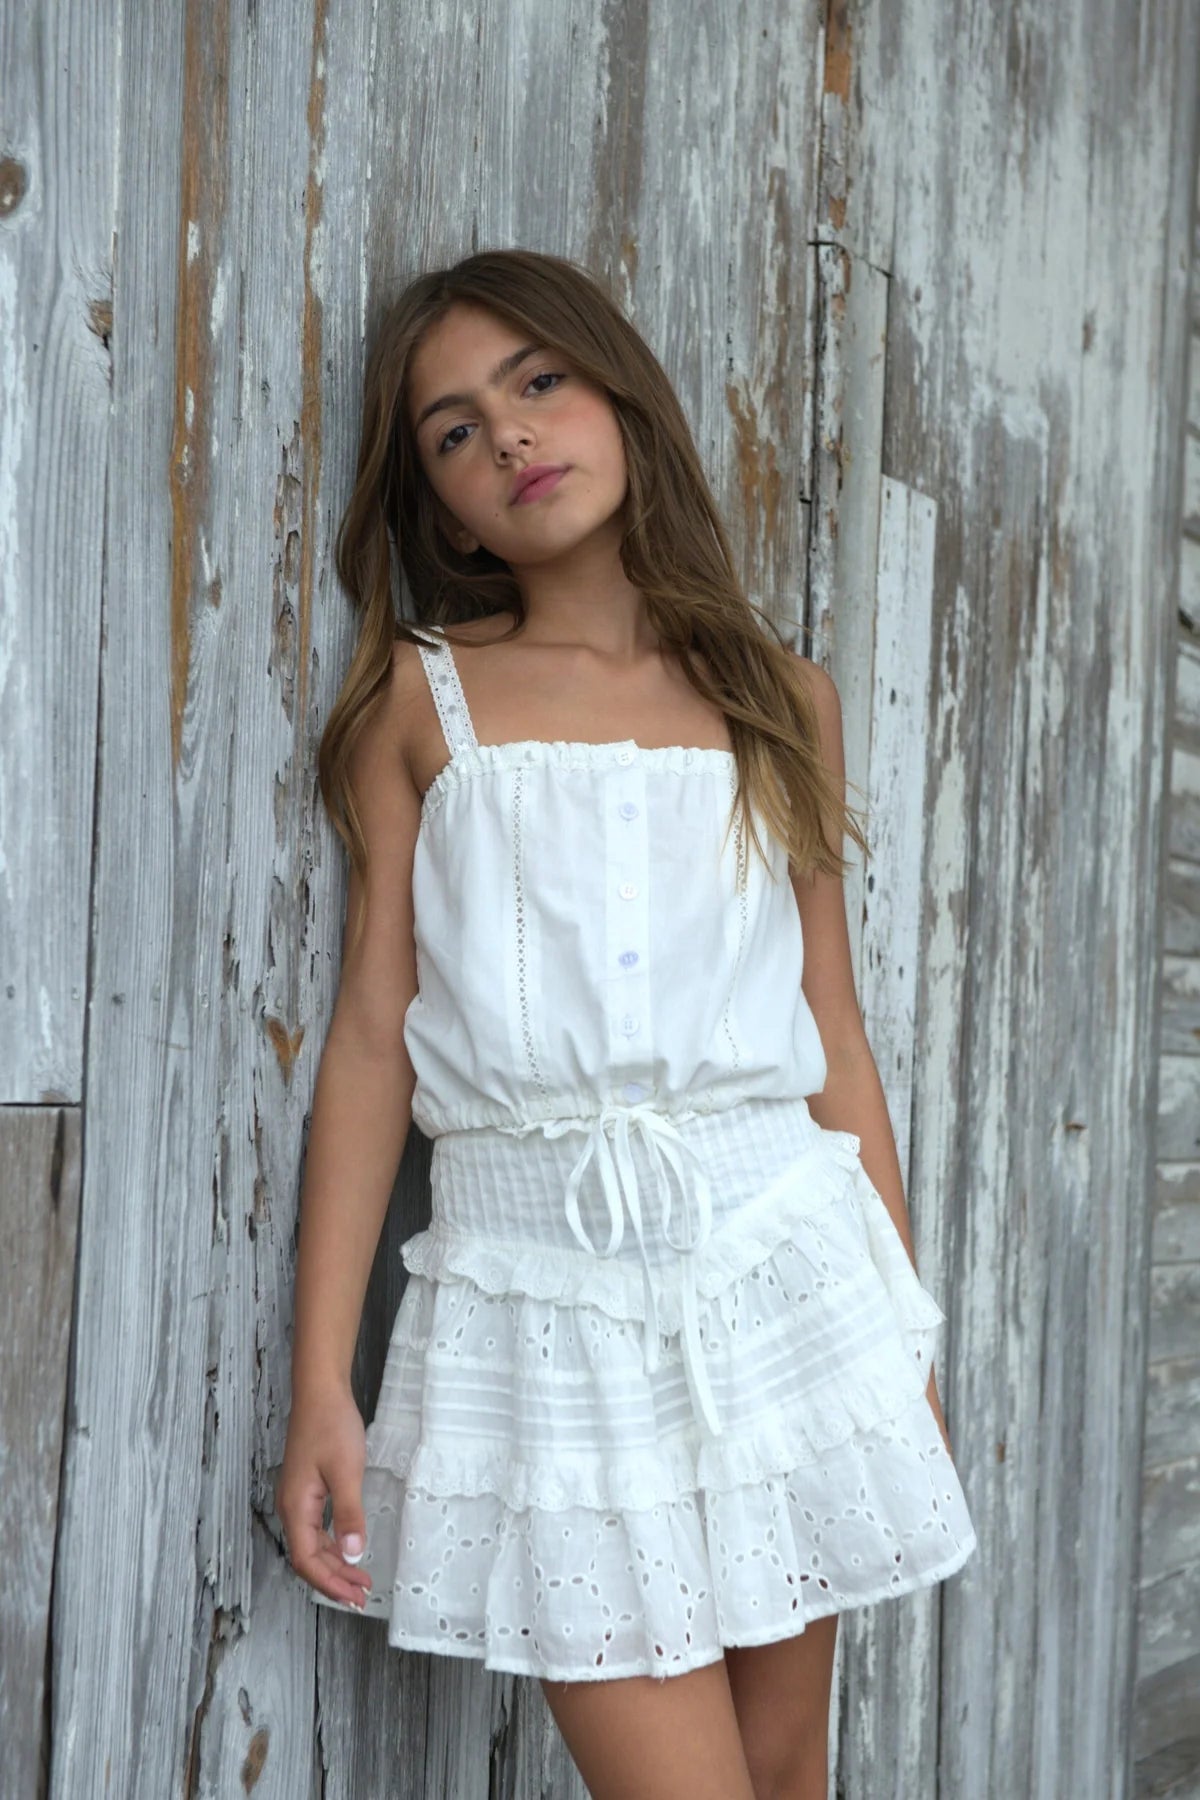 KATE J. TWEEN WILLOW TOP AND SKIRT SET - WHITE